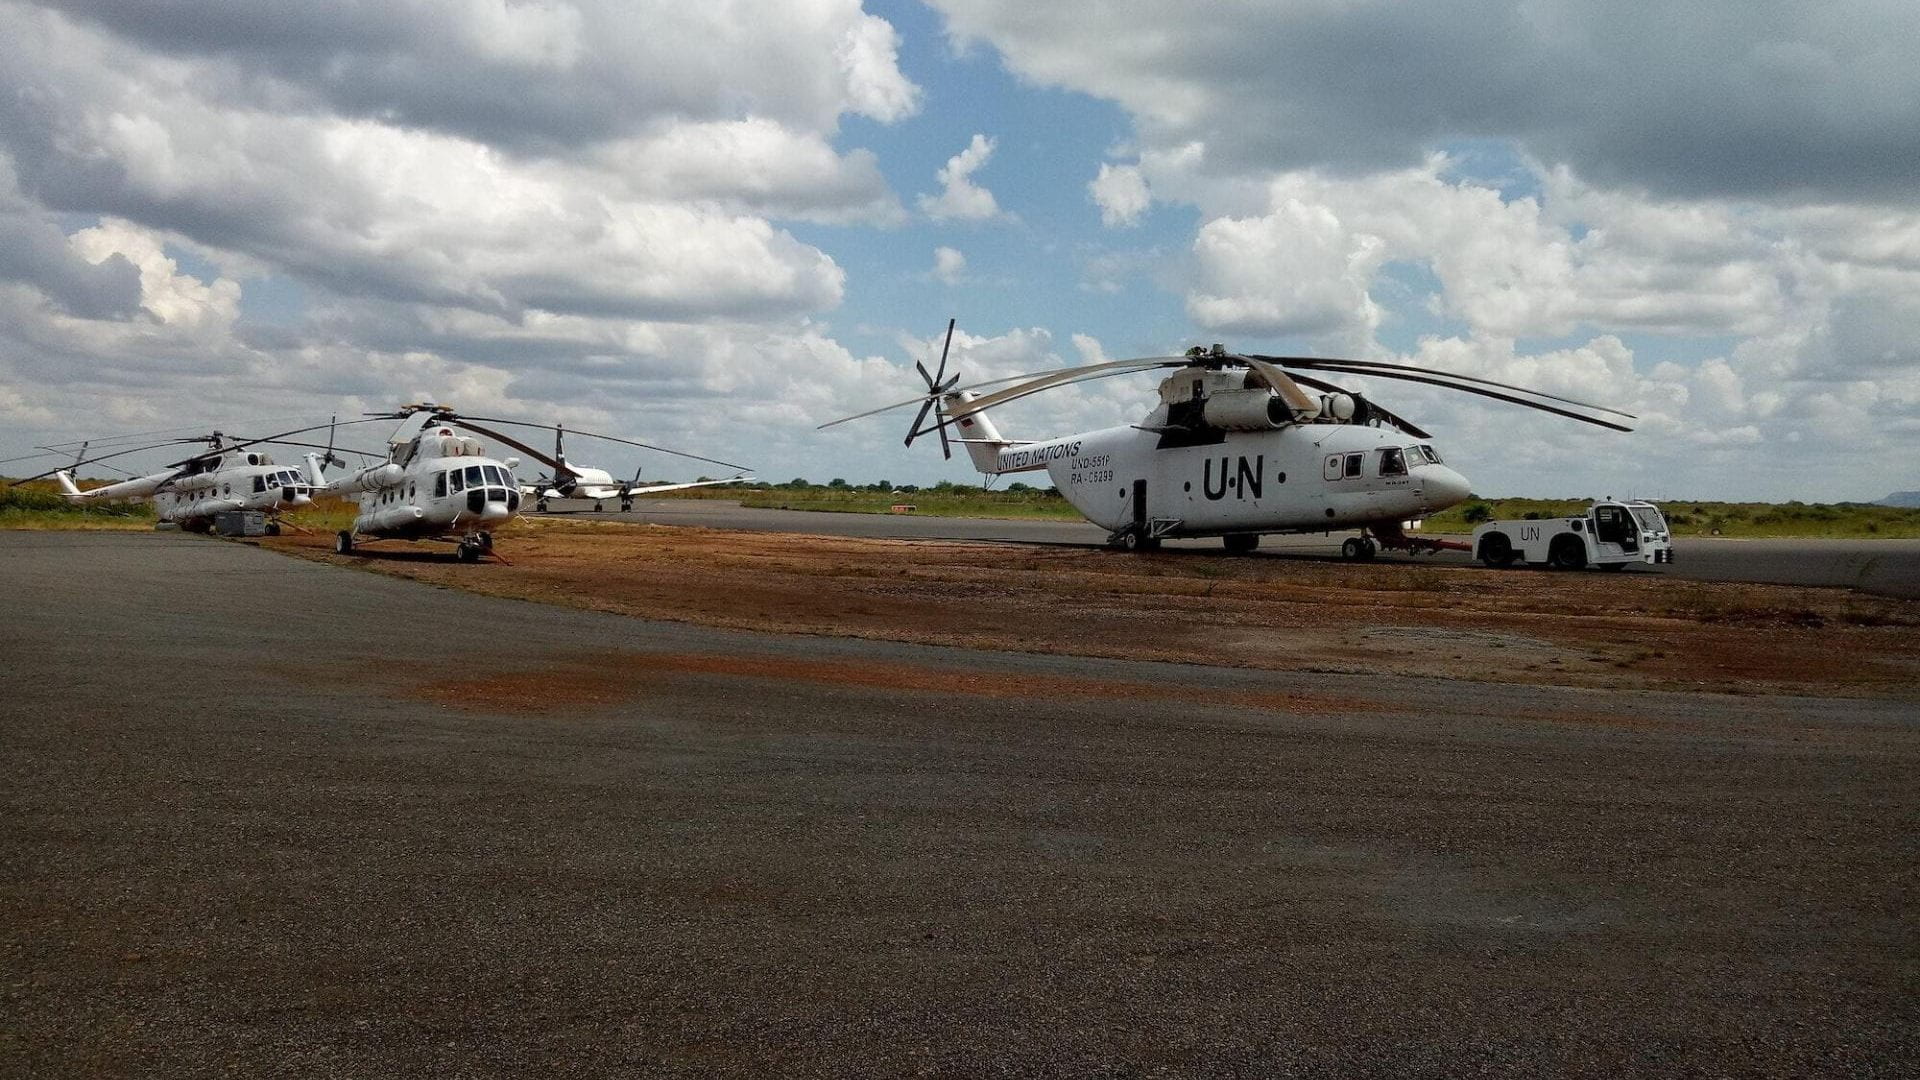 Helicopters at an airport